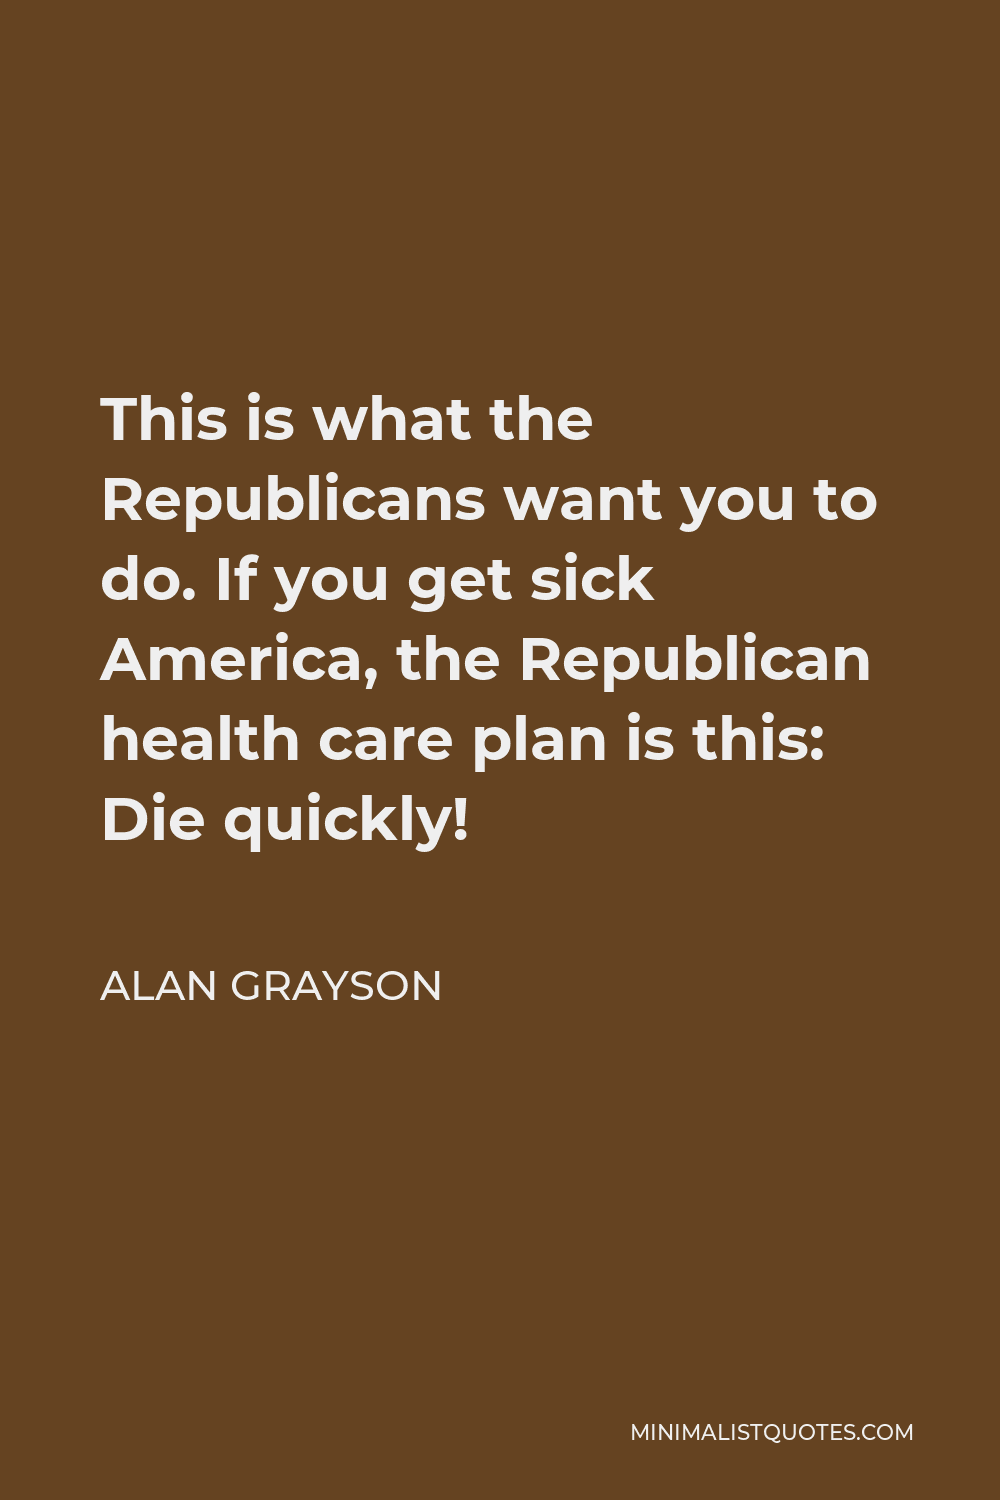 Alan Grayson Quote - This is what the Republicans want you to do. If you get sick America, the Republican health care plan is this: Die quickly!